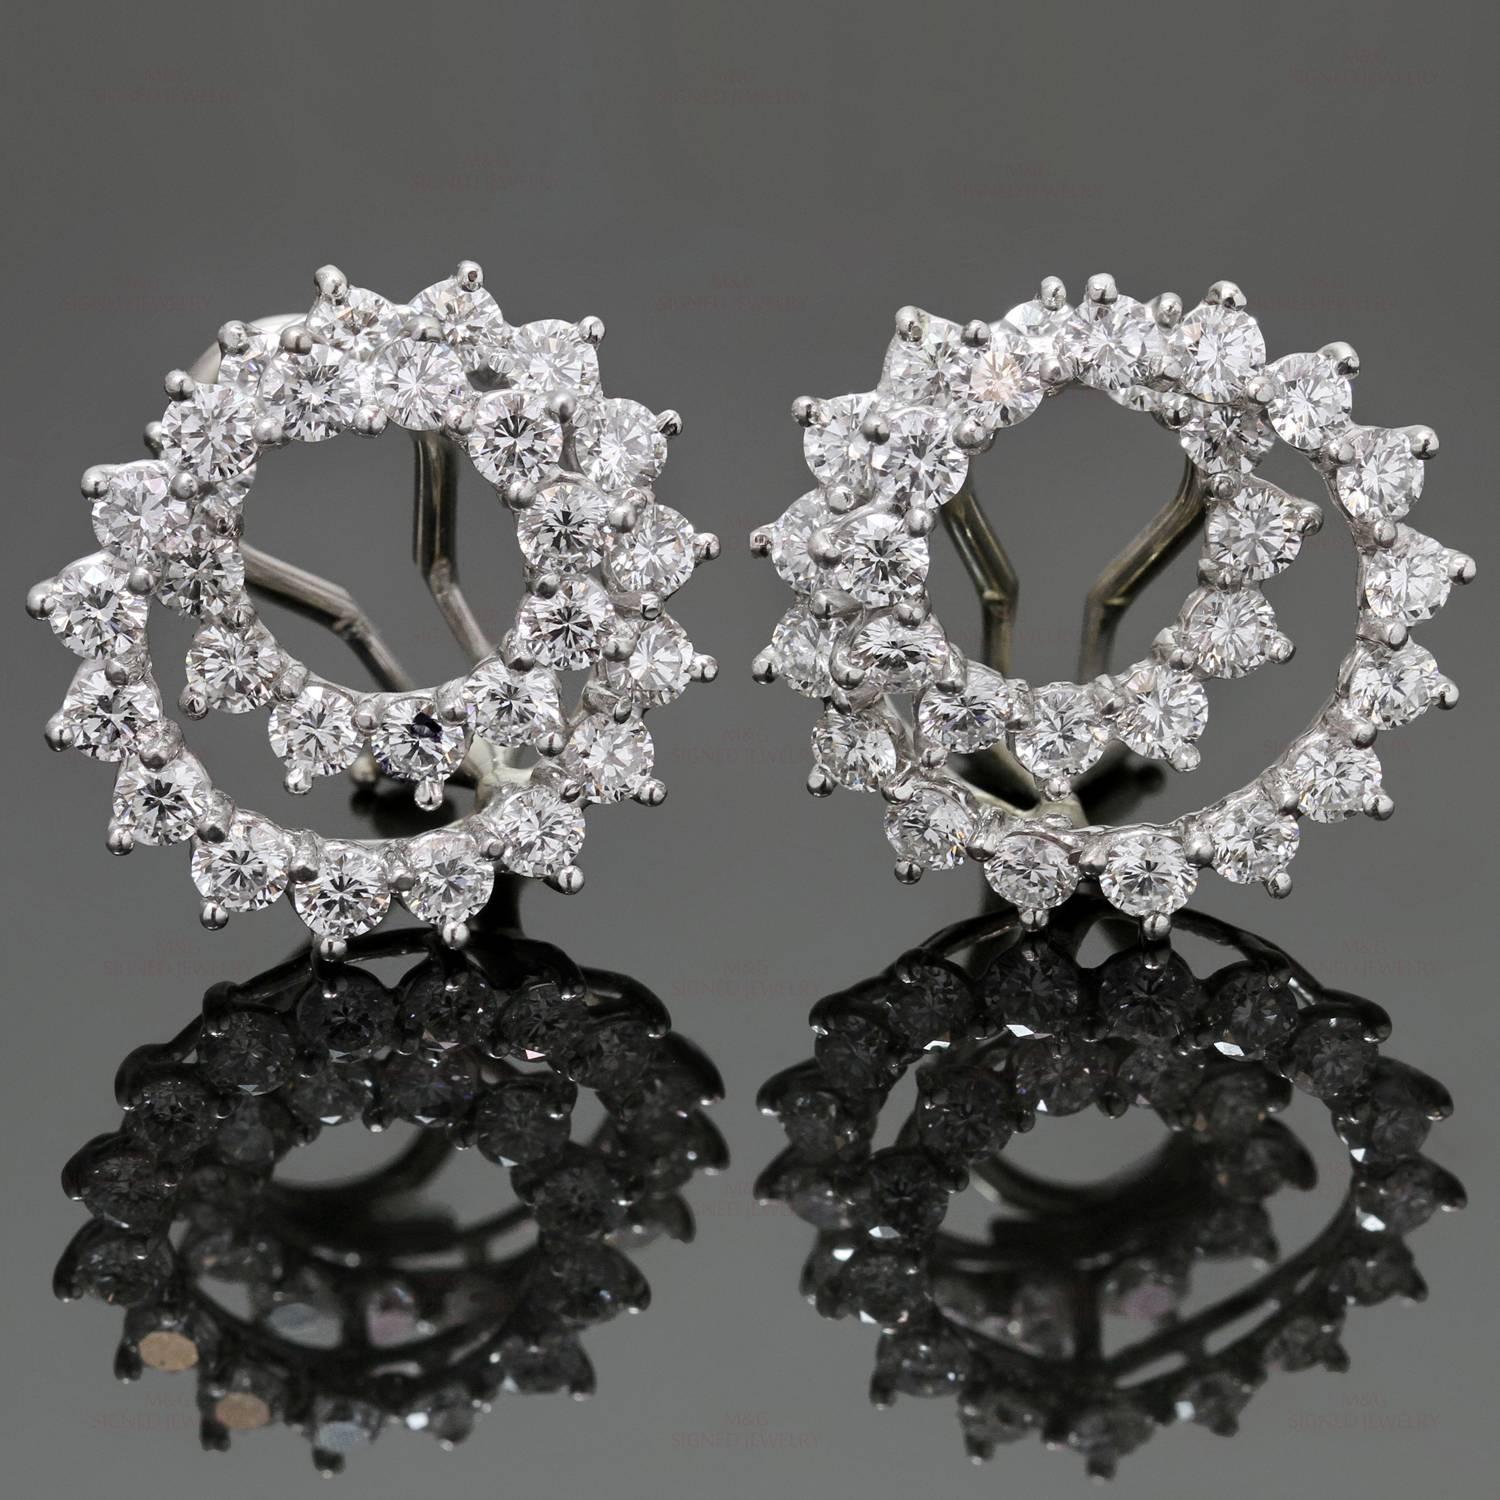 These sparkling Tiffany clip-on earrings feature an iconic swirl design crafted in platinum and set with brilliant-cut round diamonds of an estimated 5.0 carats. Made in United States circa 1950s. Measurements: 0.78" (20mm) width, 0.78"